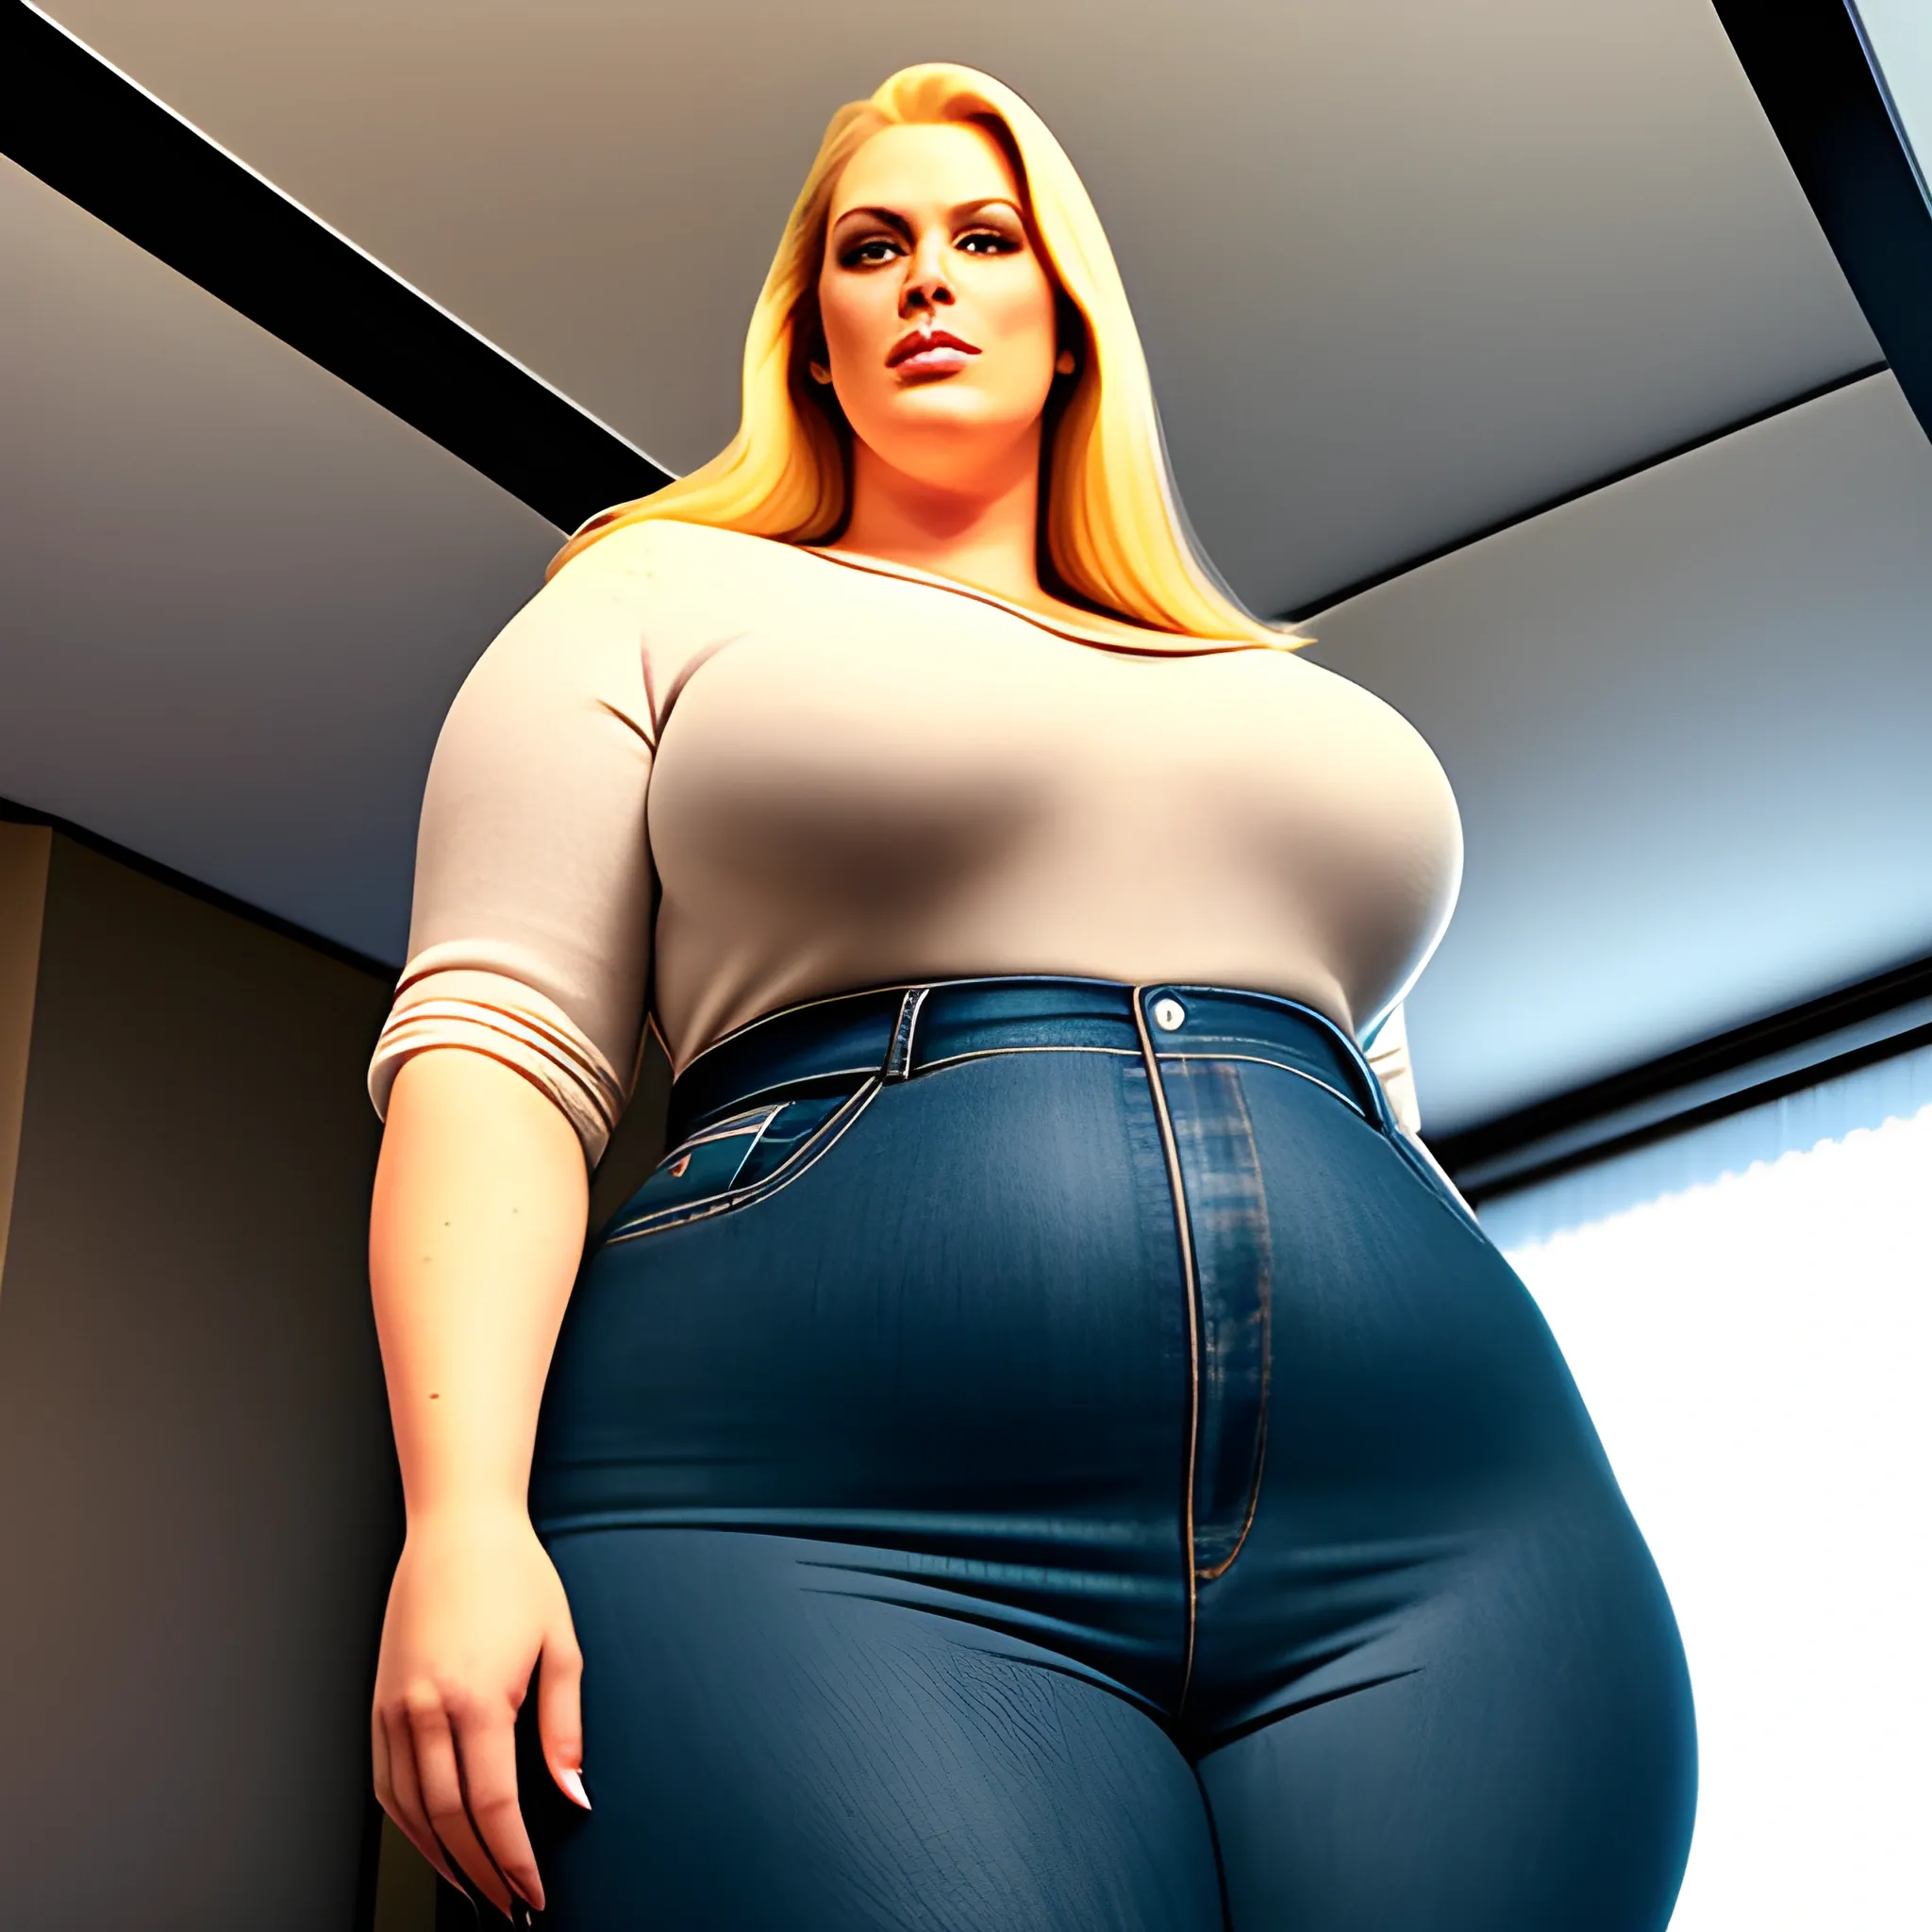 very tall plus size blonde very young girl with small head and v